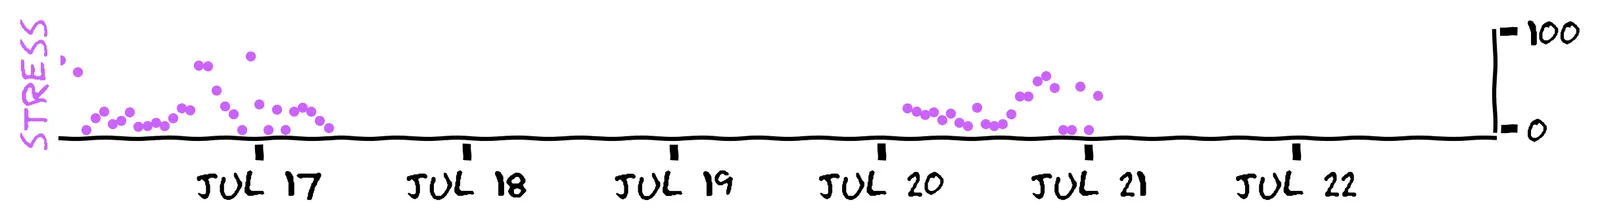 A plot of time vs stress measurements. The x-axis is time, running from July 16 to July 22. The y-axis is stress, running from 0 to 100. Some solid purple points are plotted. But there are big gaps in the data.